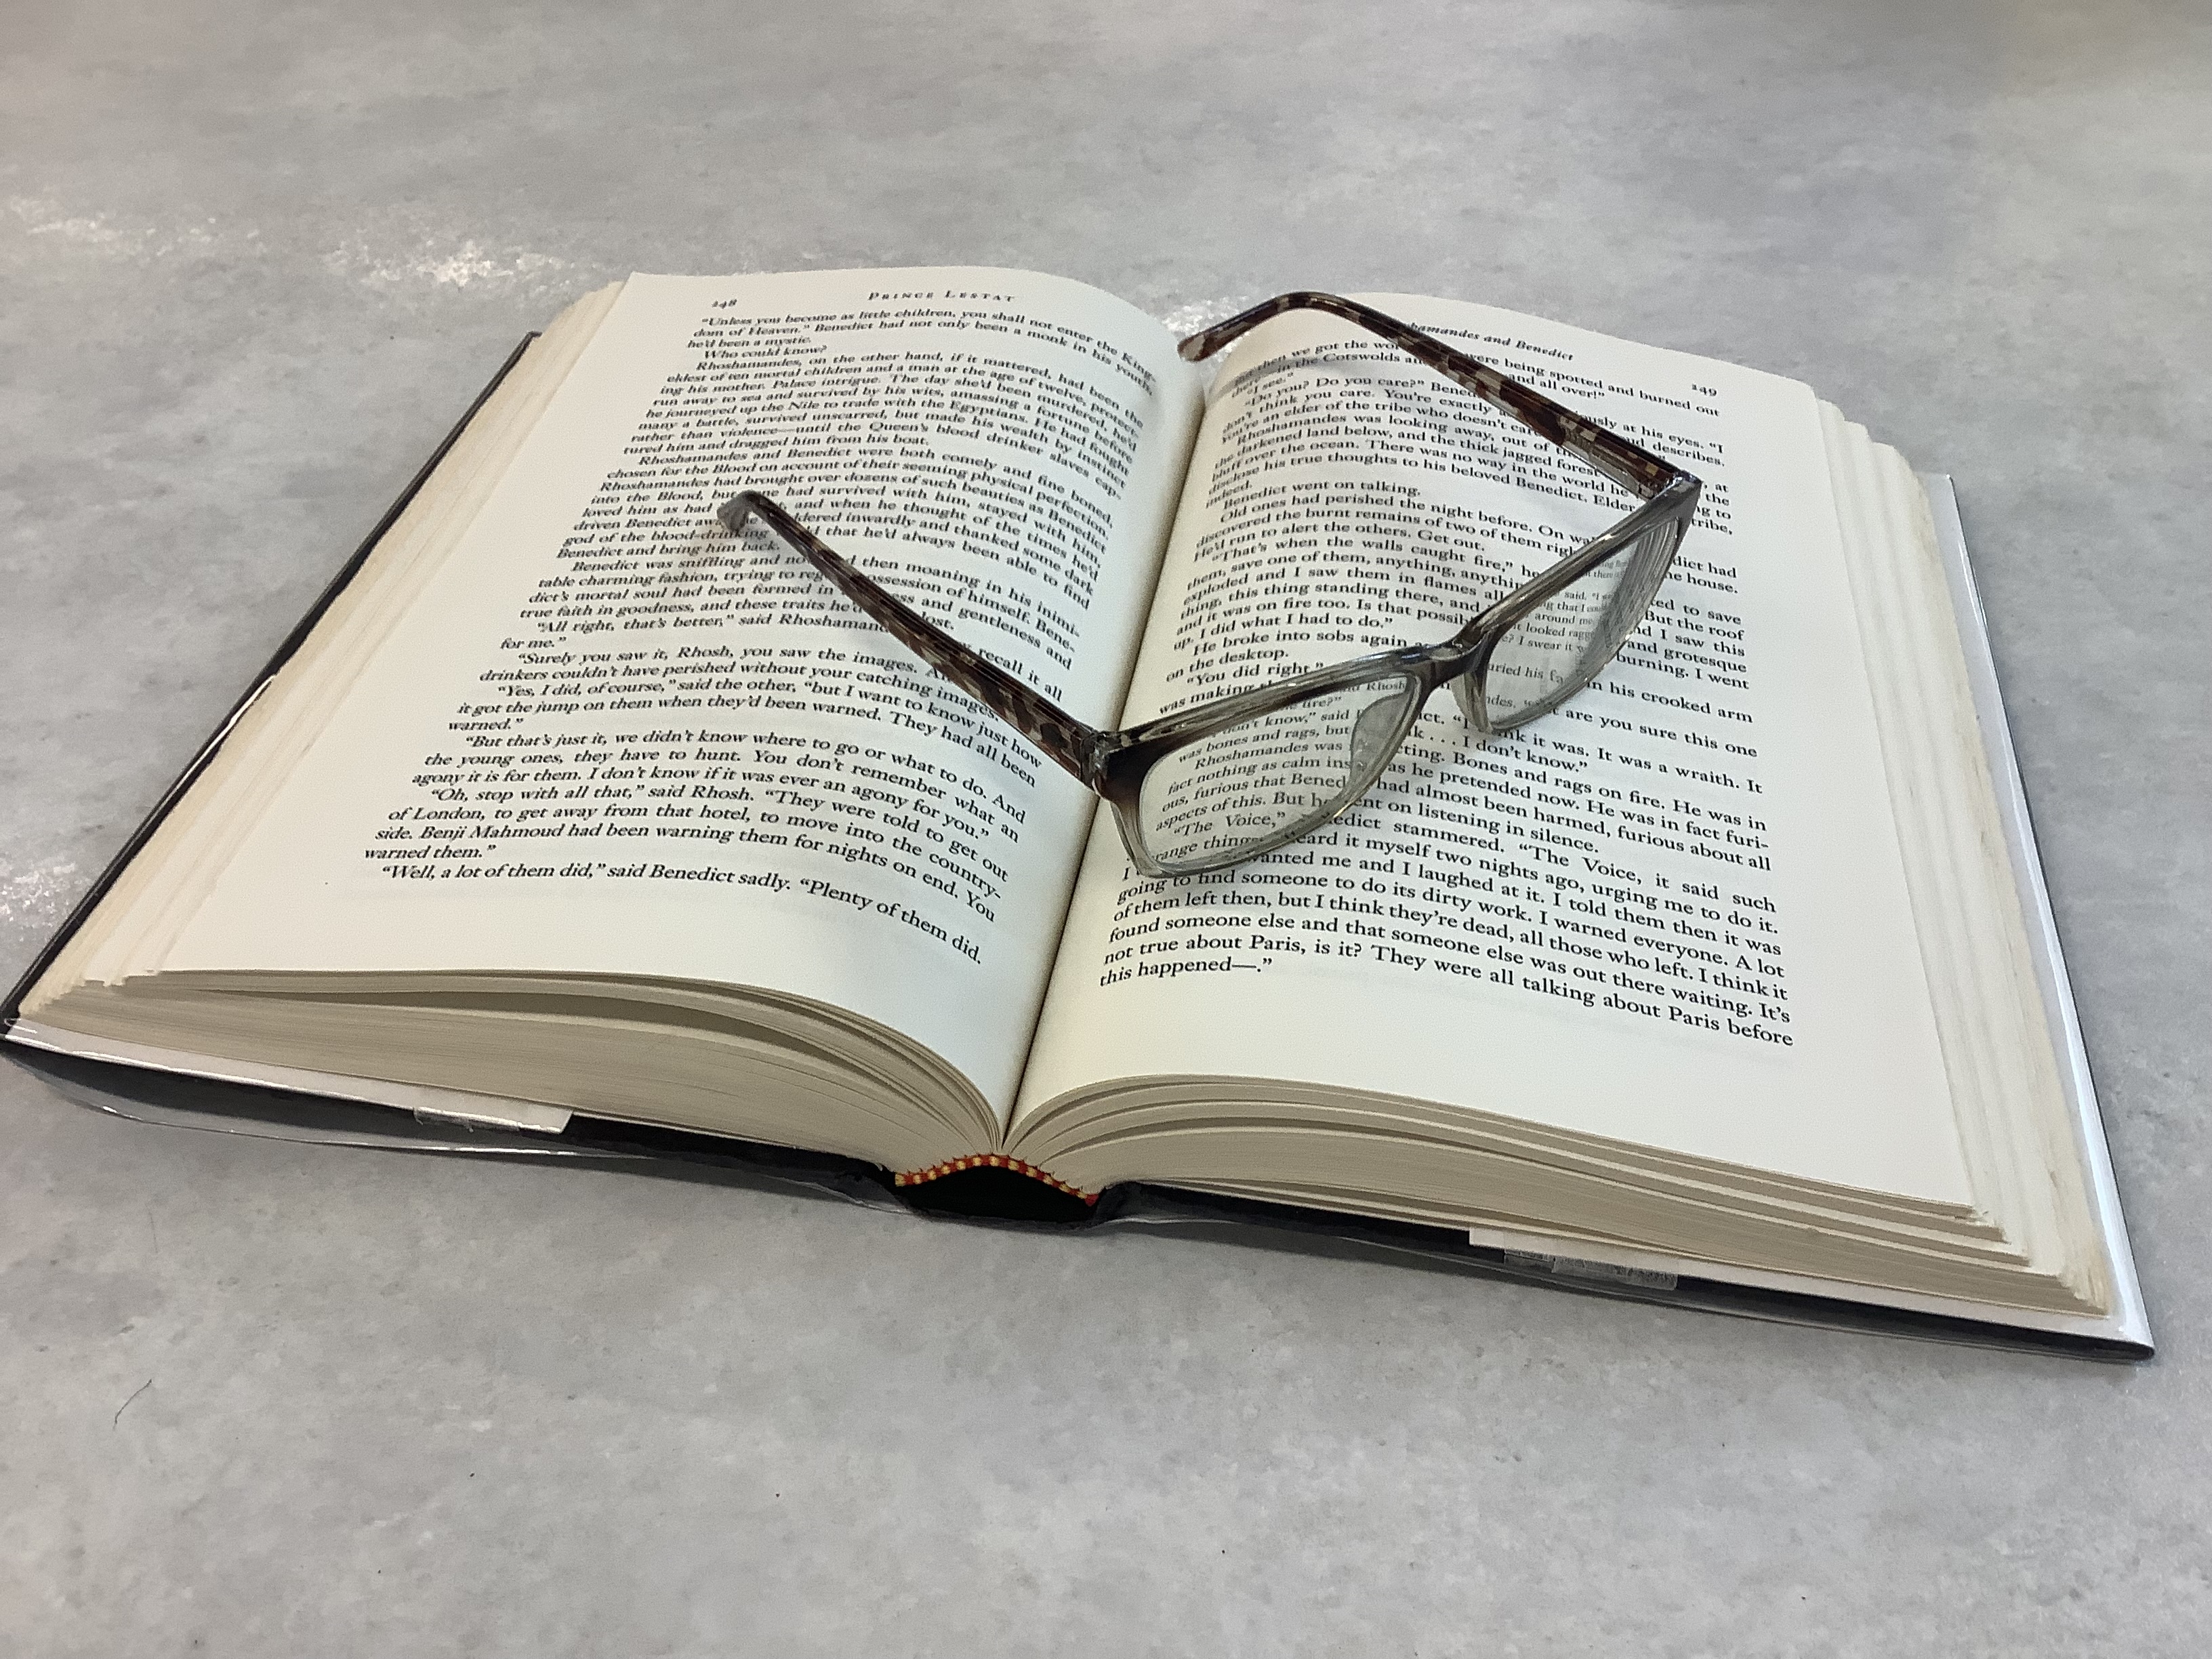 A book lying open with a pair of reading glasses on top